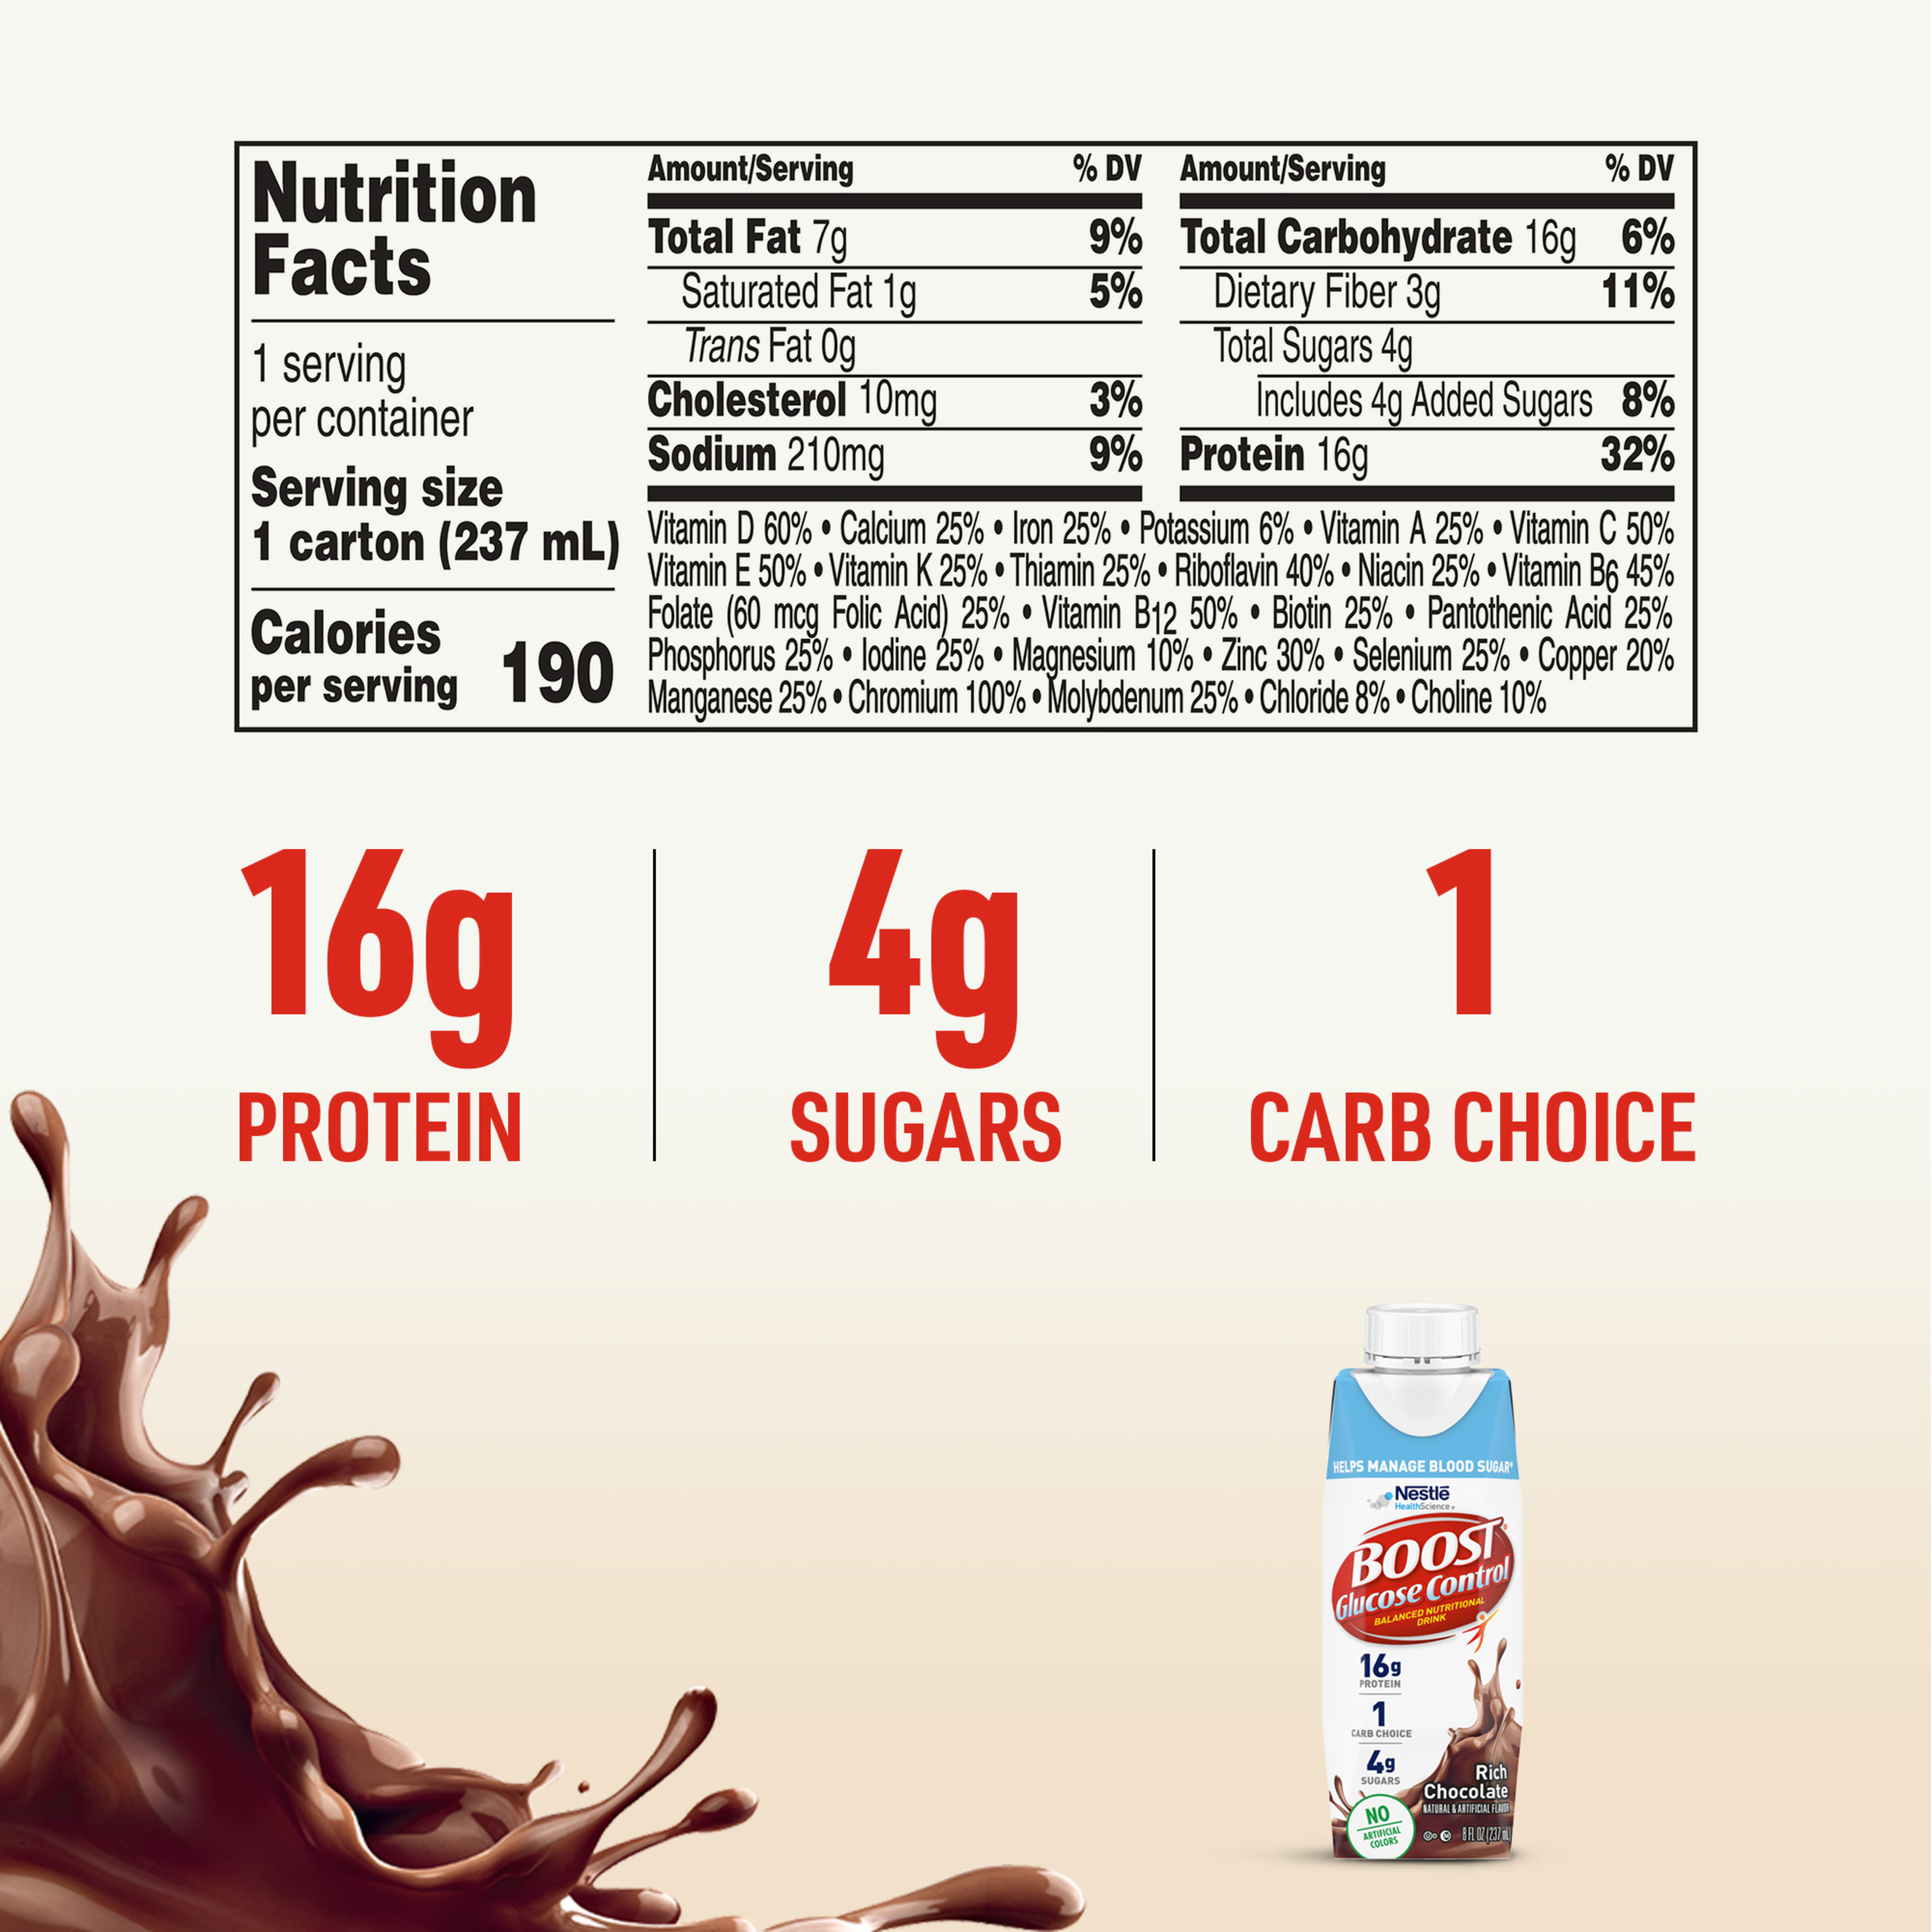 BOOST Glucose Control Nutritional Drink, Rich Chocolate, 16 g Protein, 12 - 8 fl oz Cartons - image 3 of 9